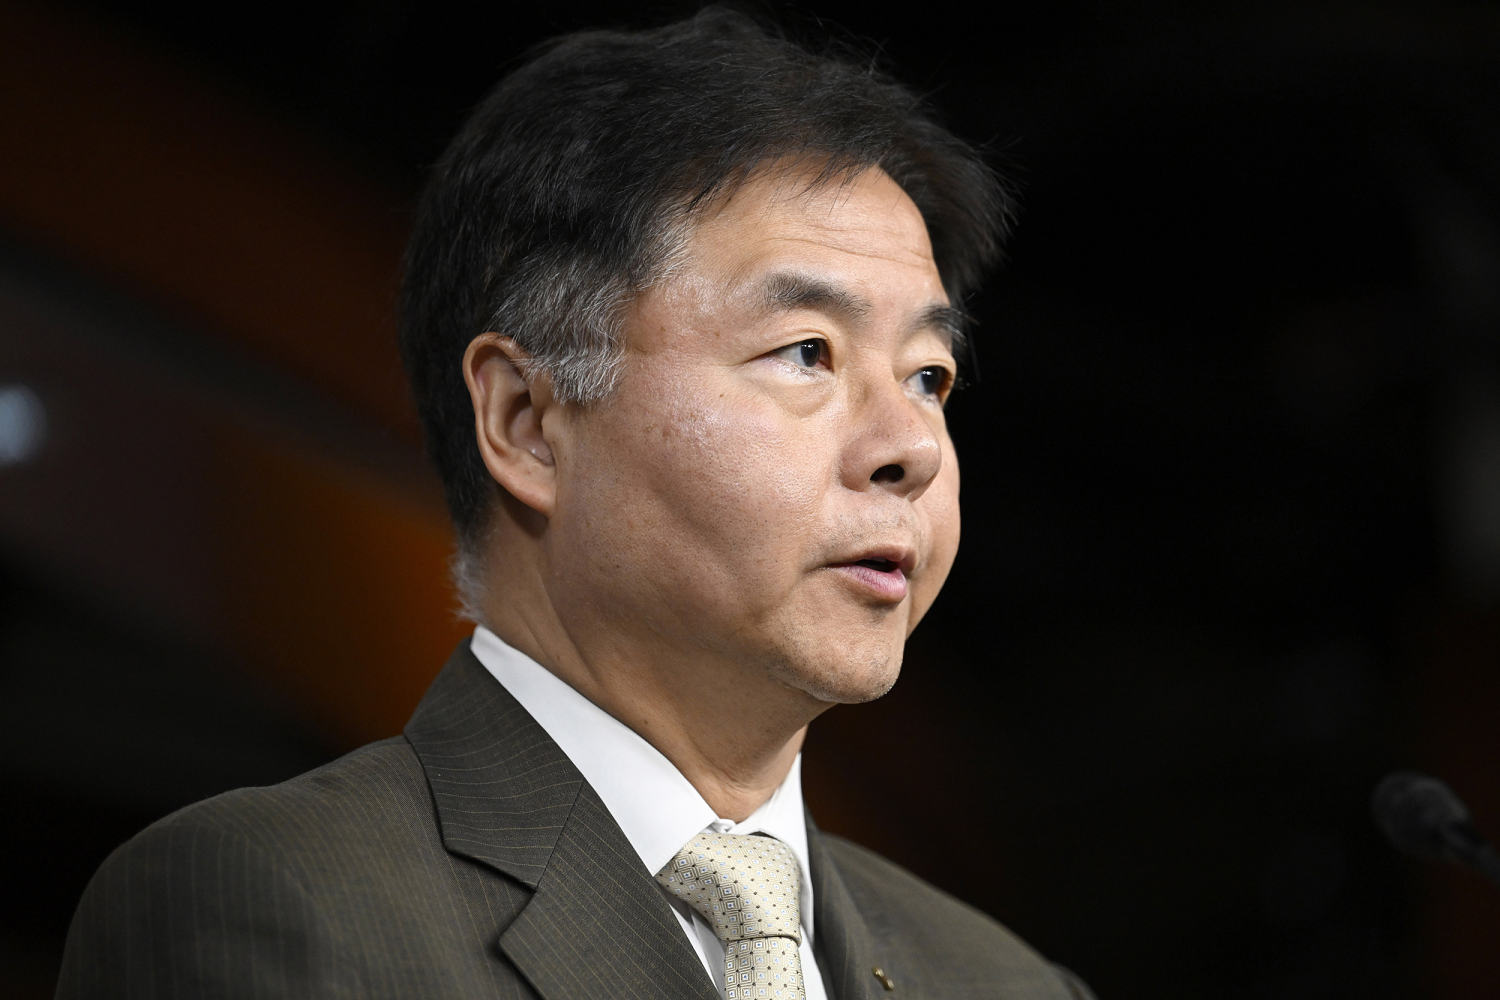 Rep. Ted Lieu urges media to dig deeper into Trump-Epstein ties